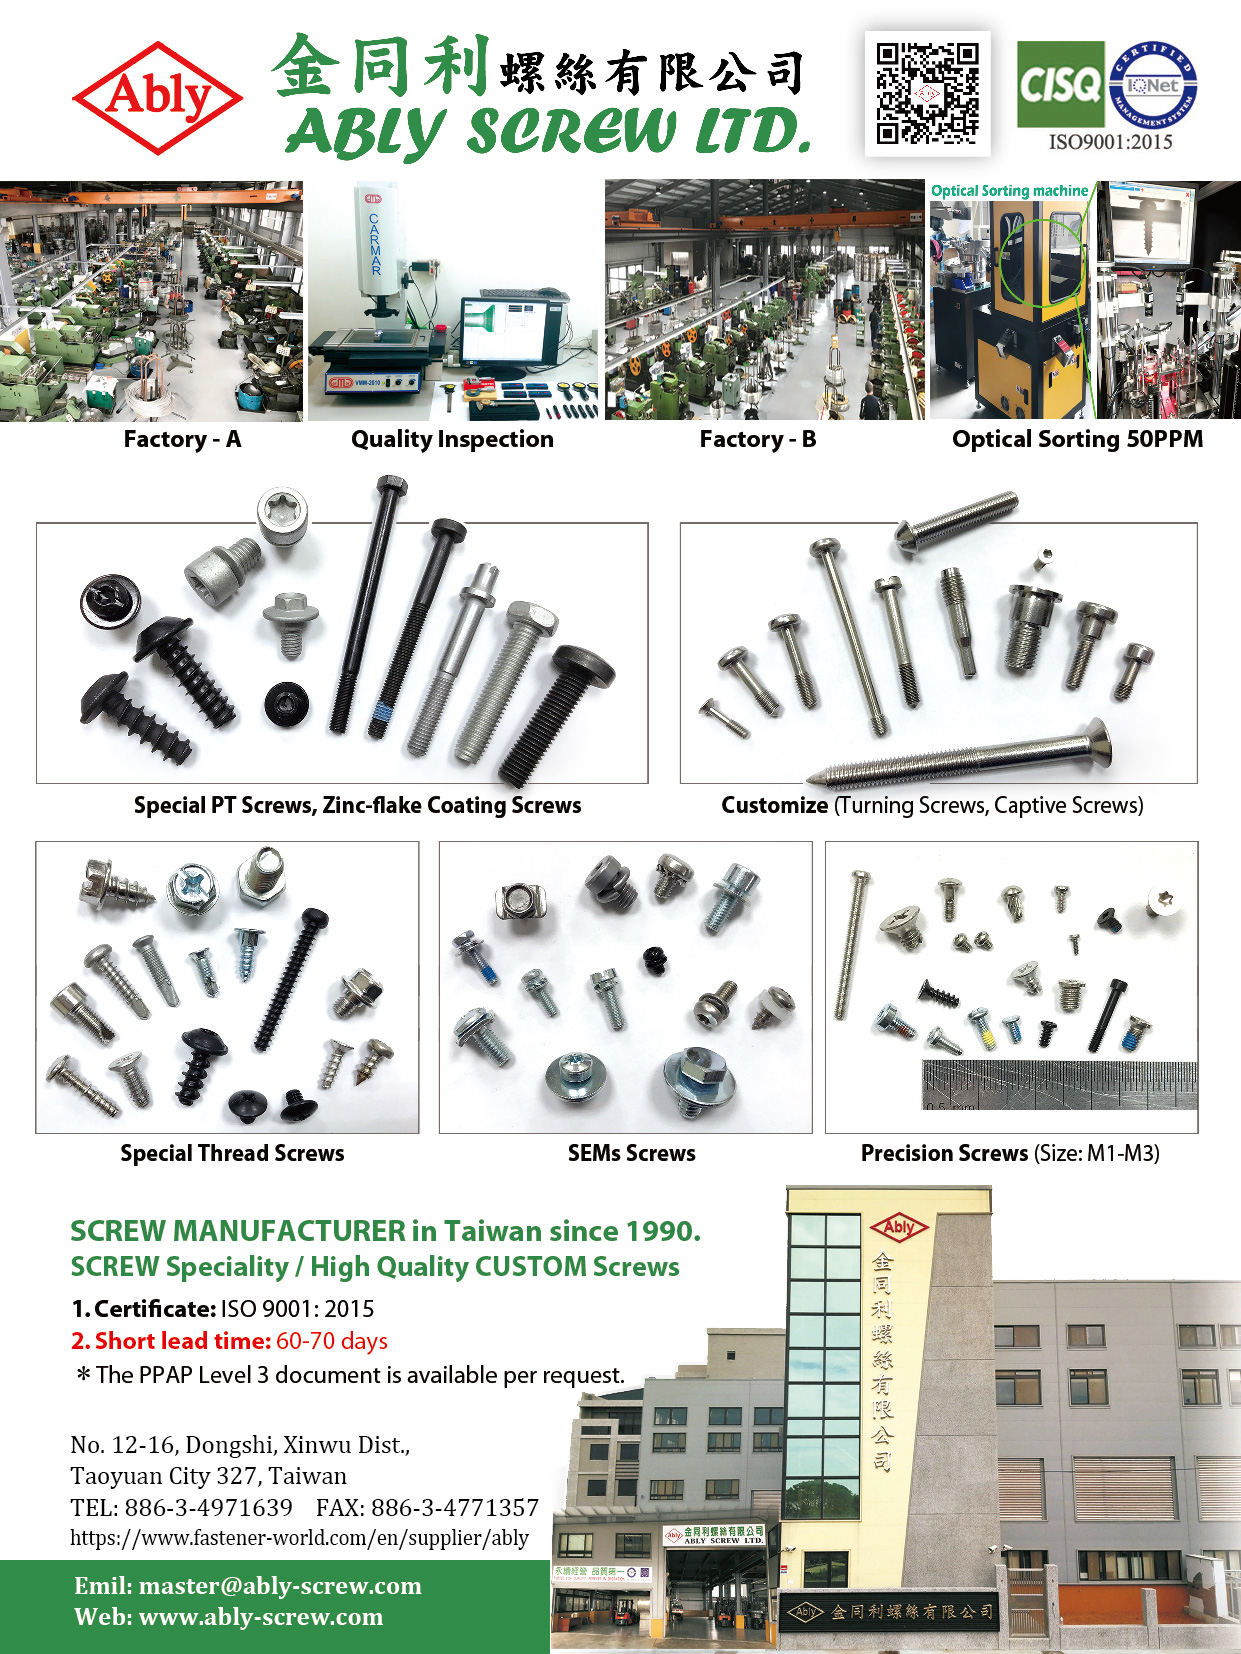 ABLY SCREW LTD._Online Catalogues